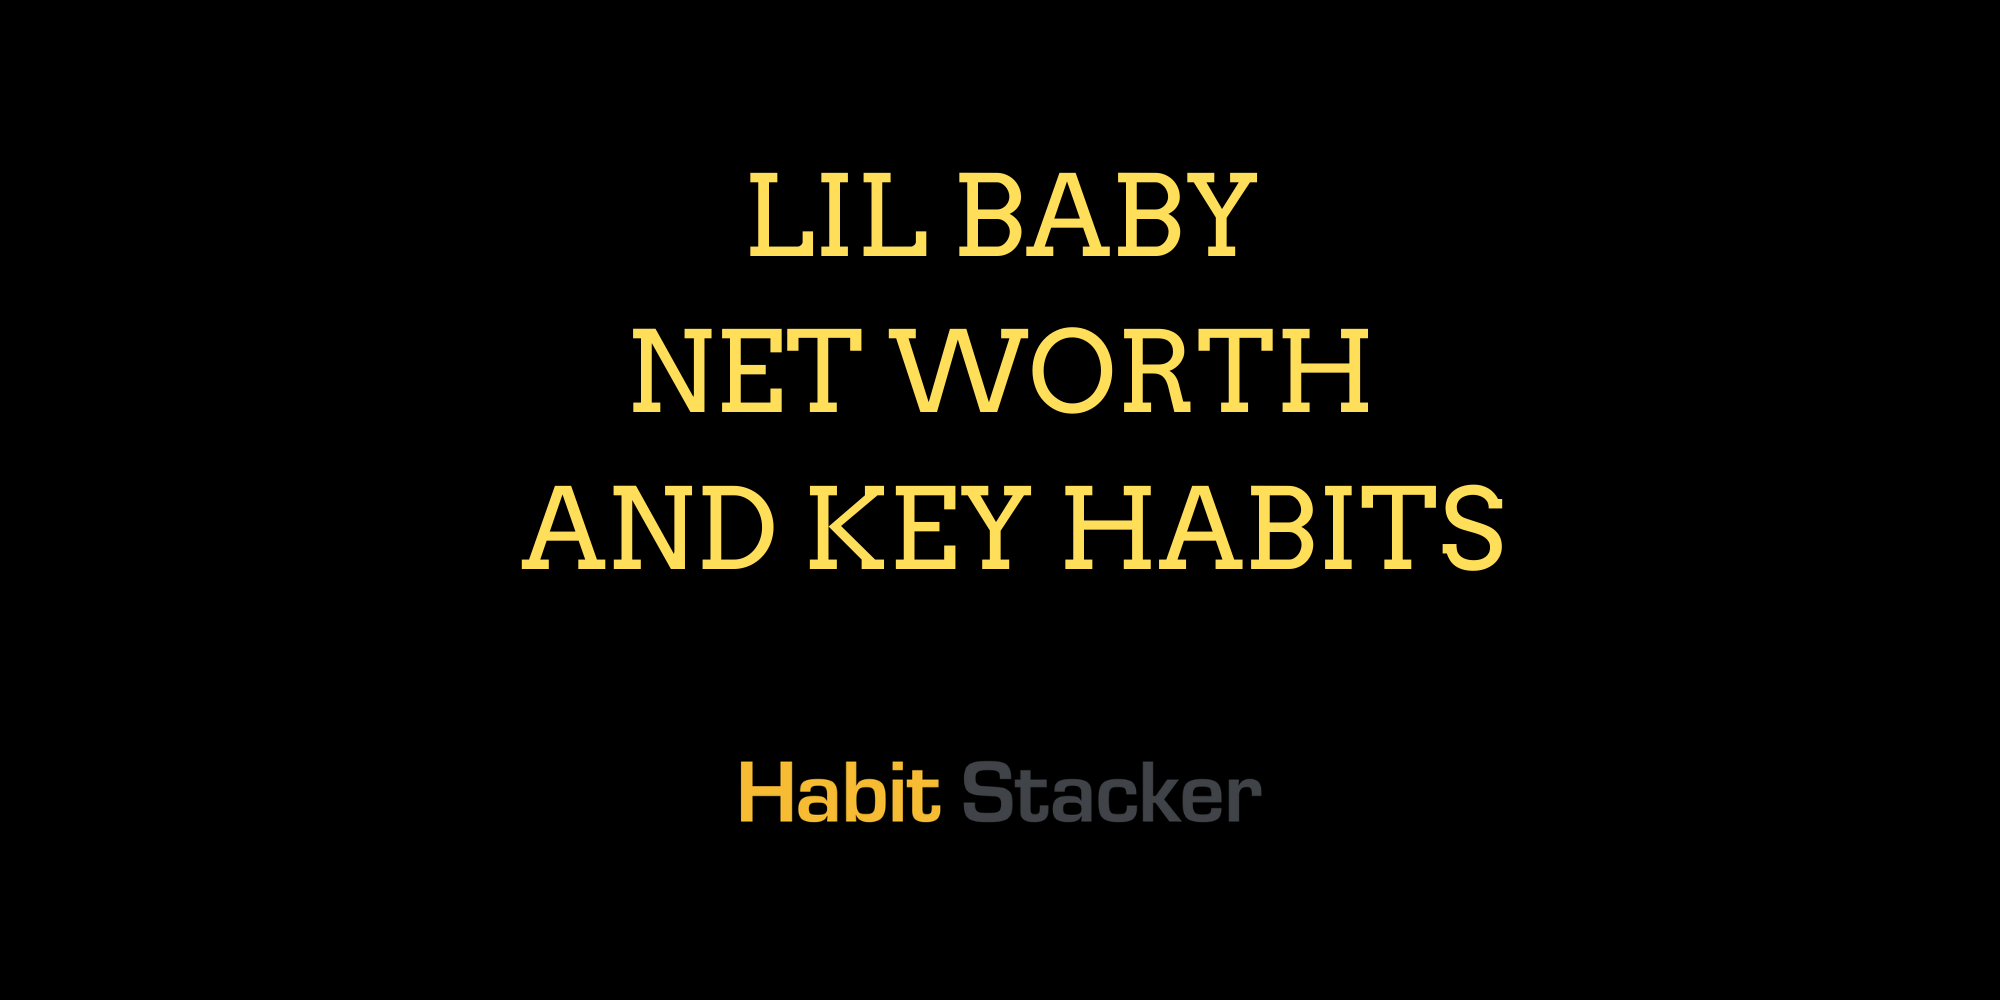 Lil Baby Net Worth and Key Habits